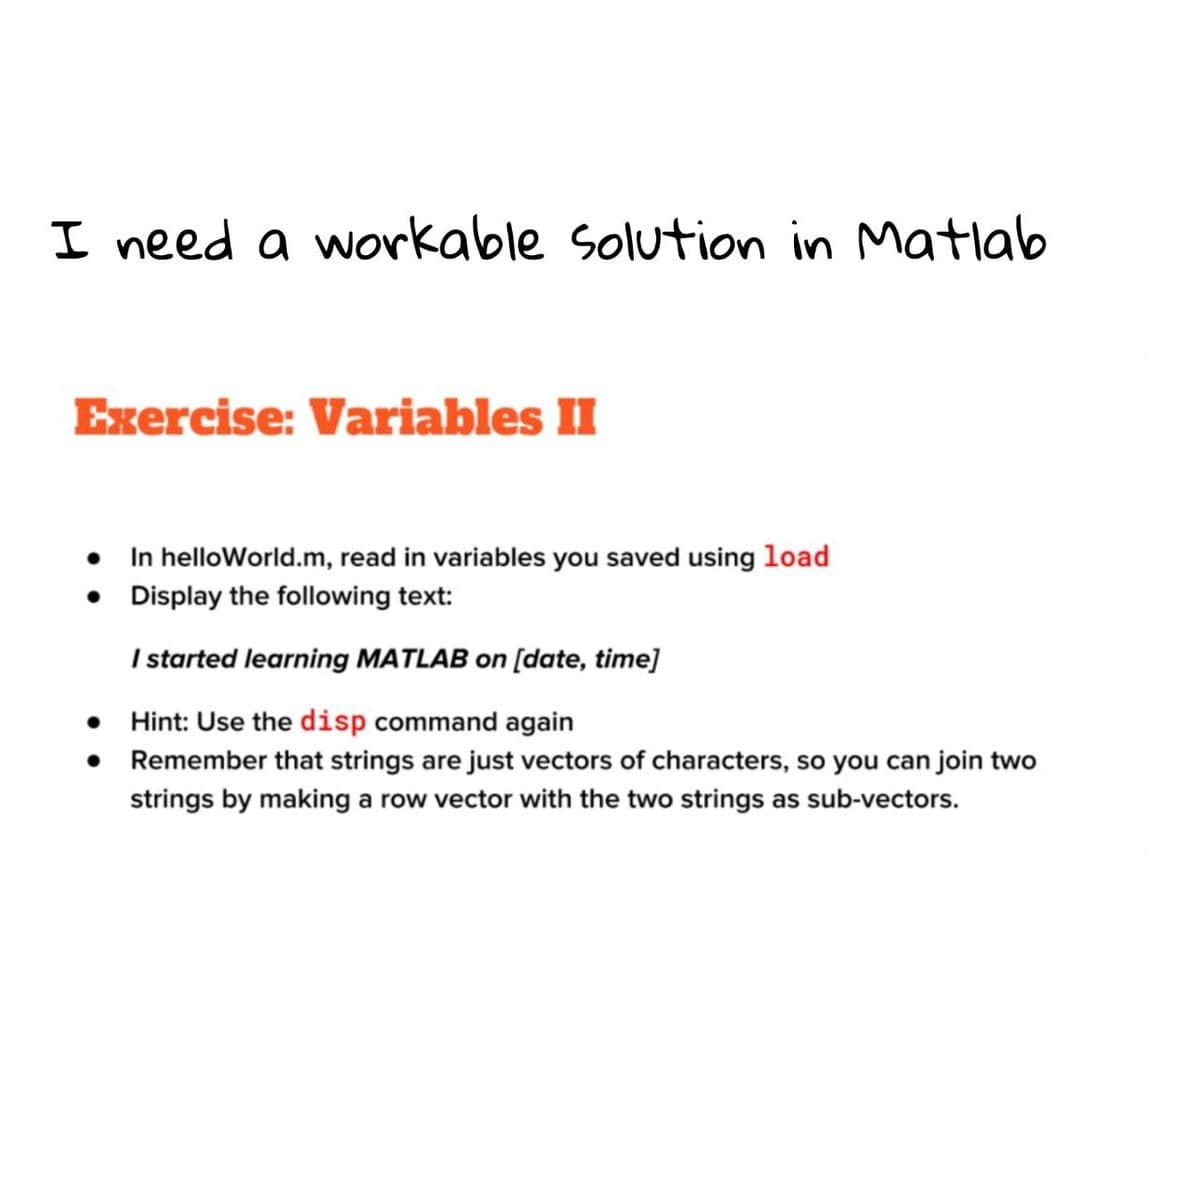 I need a workable Solution in Matlab
Exercise: Variables II
• In helloWorld.m, read in variables you saved using load
• Display the following text:
I started learning MATLAB on [date, time]
Hint: Use the disp command again
• Remember that strings are just vectors of characters, so you can join two
SO
strings by making a row vector with the two strings as sub-vectors.
